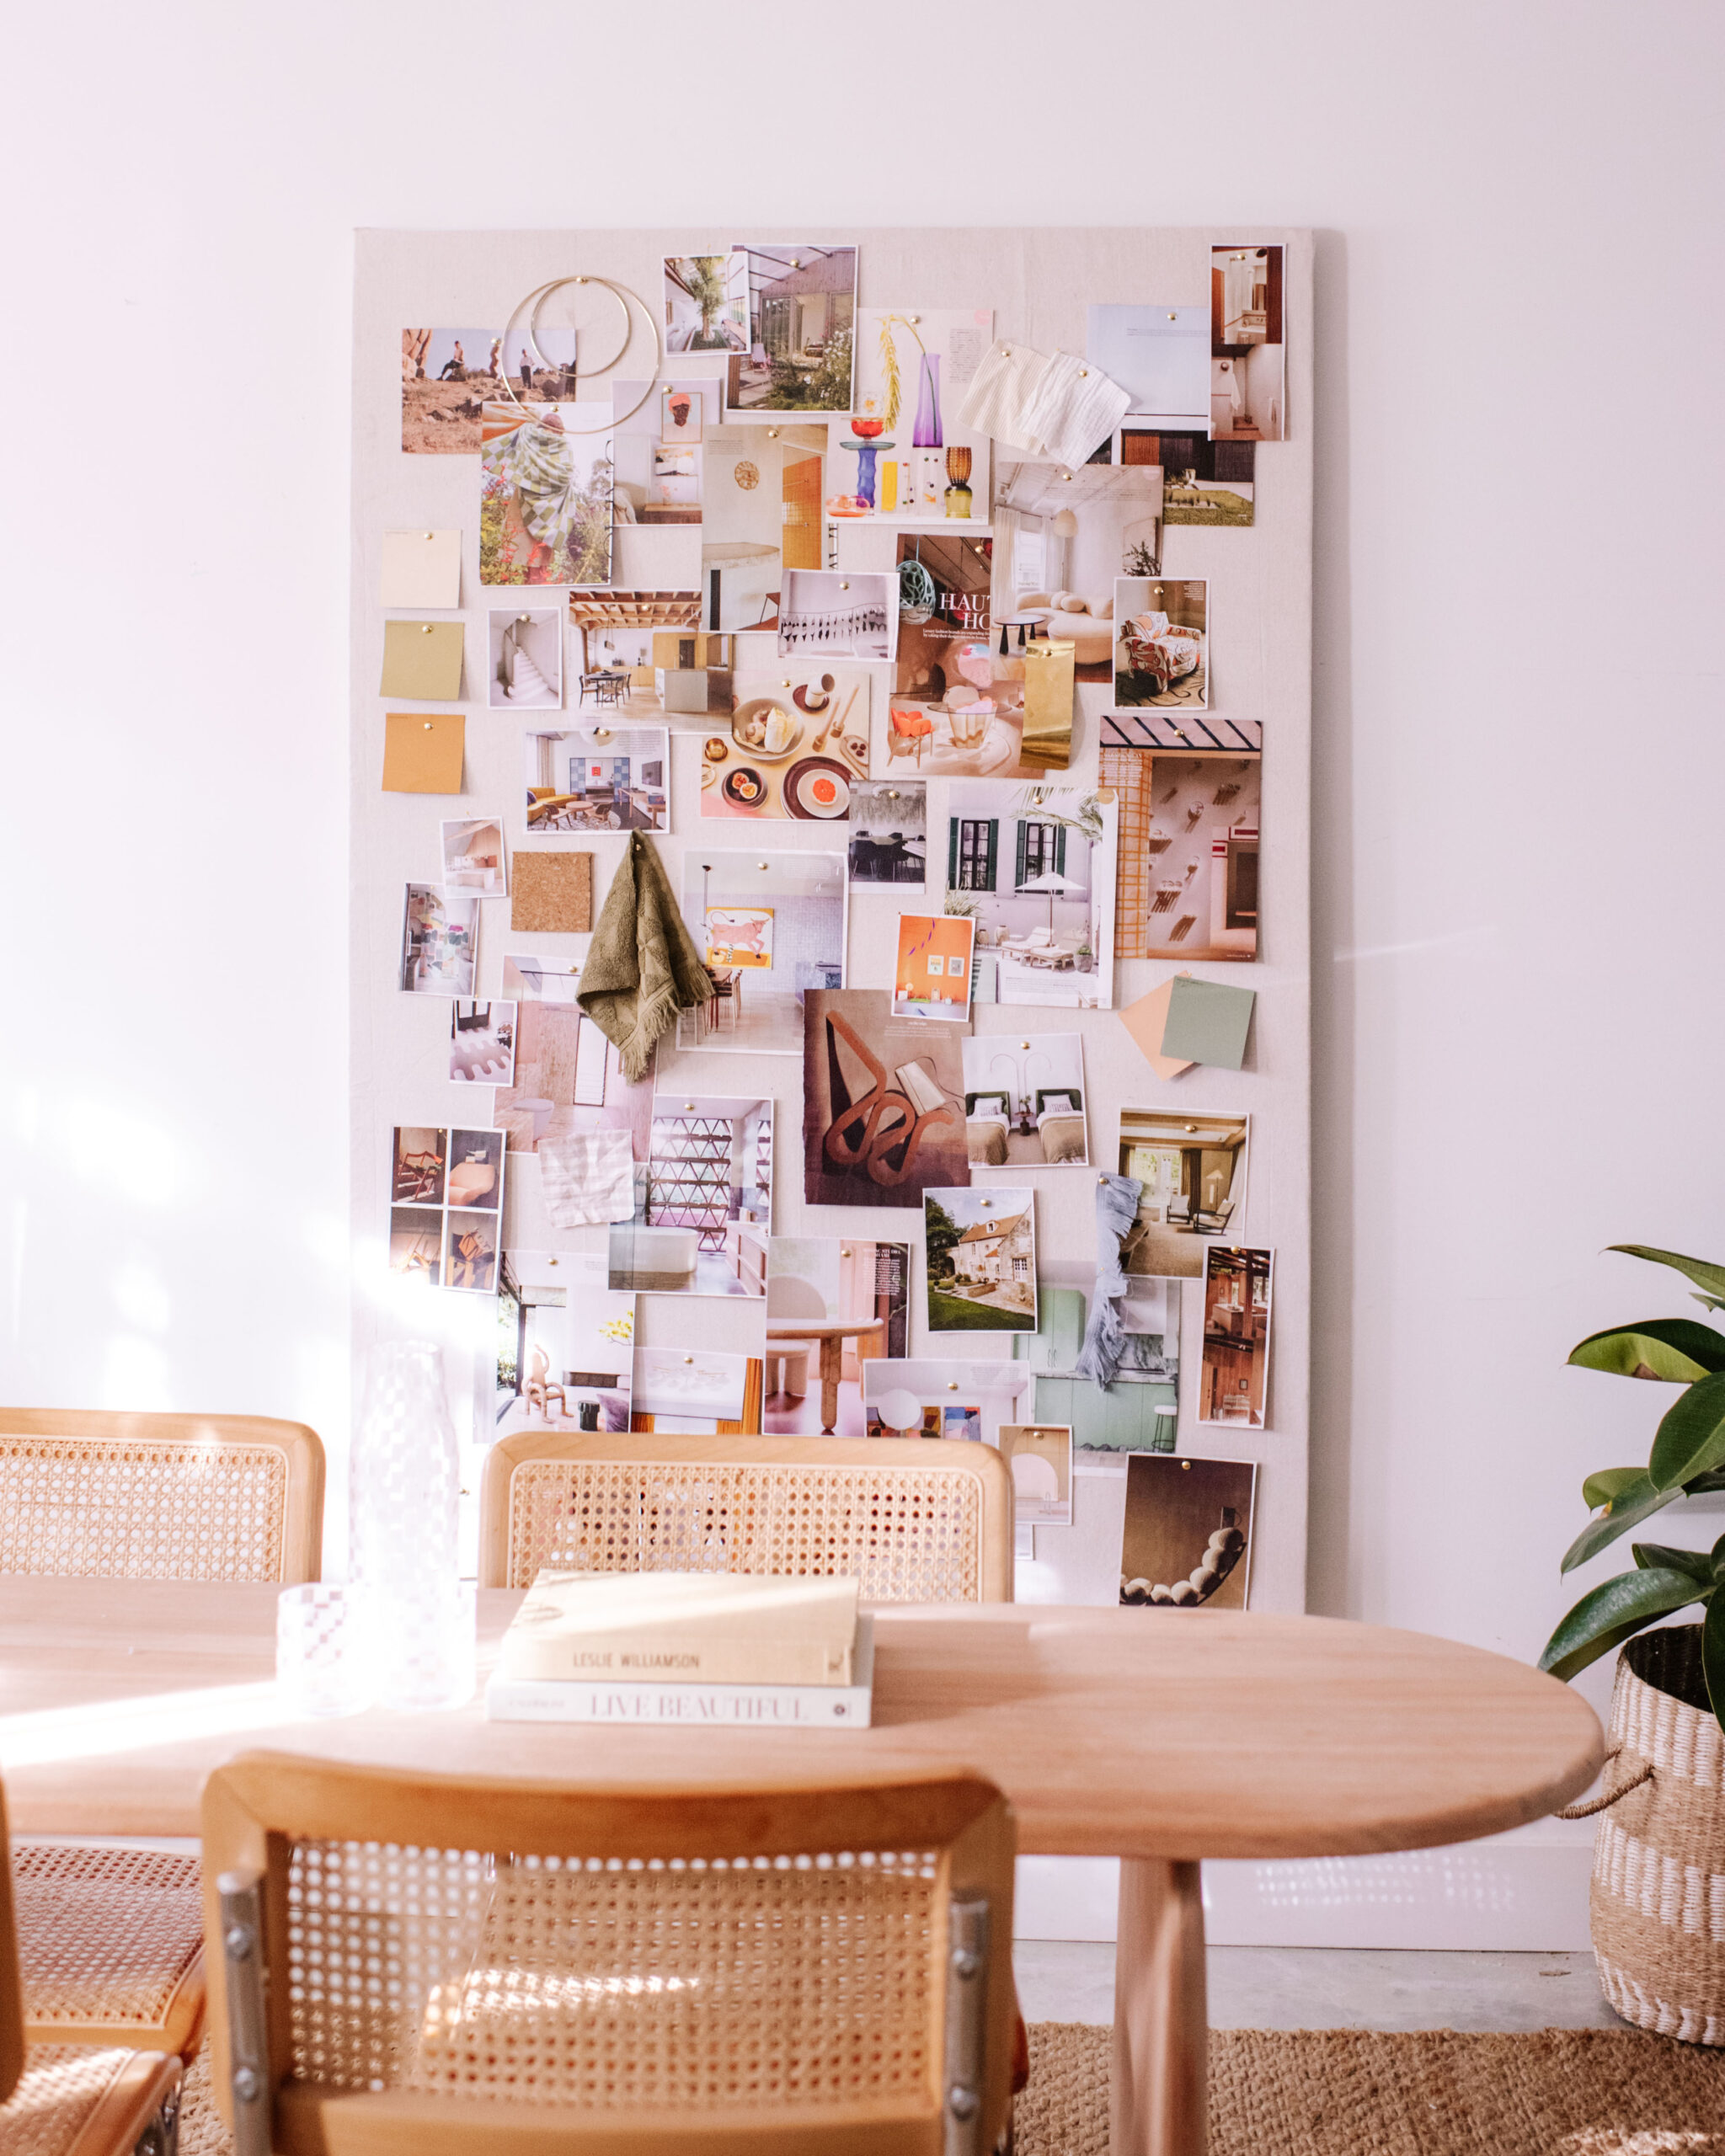 How to Make a Giant Inspiration Pin Board